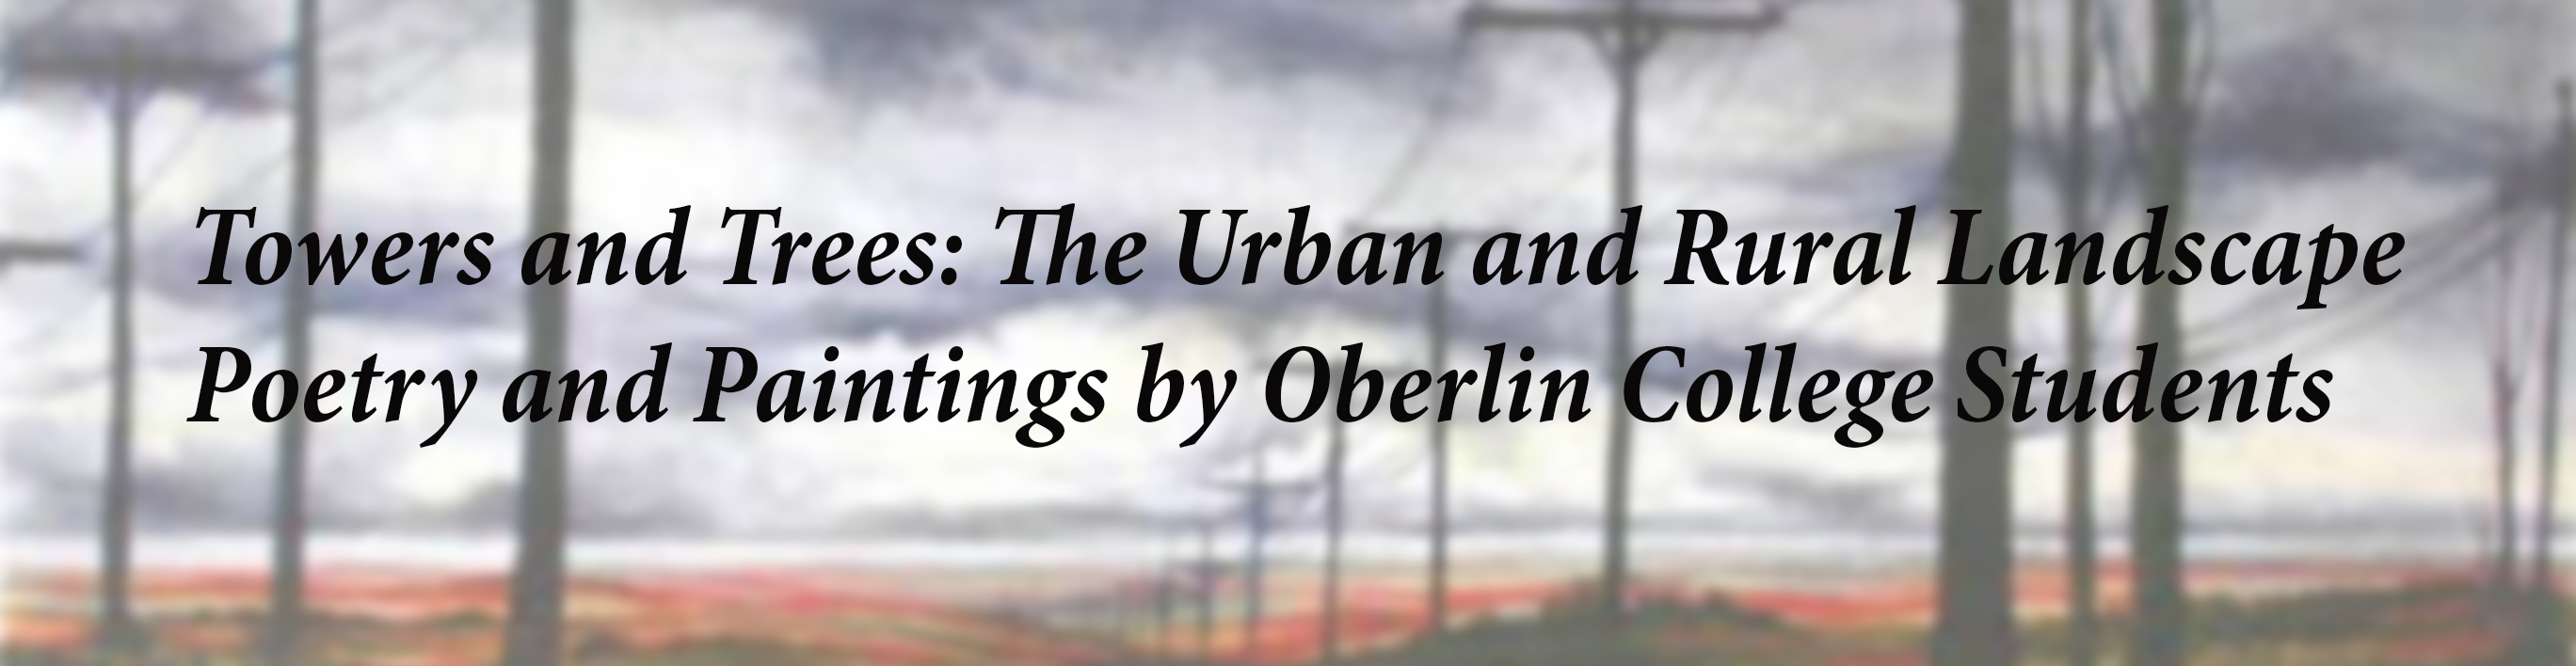 Towers and Trees: The Urban and Rural Landscape
Poetry and Paintings by Oberlin College Students